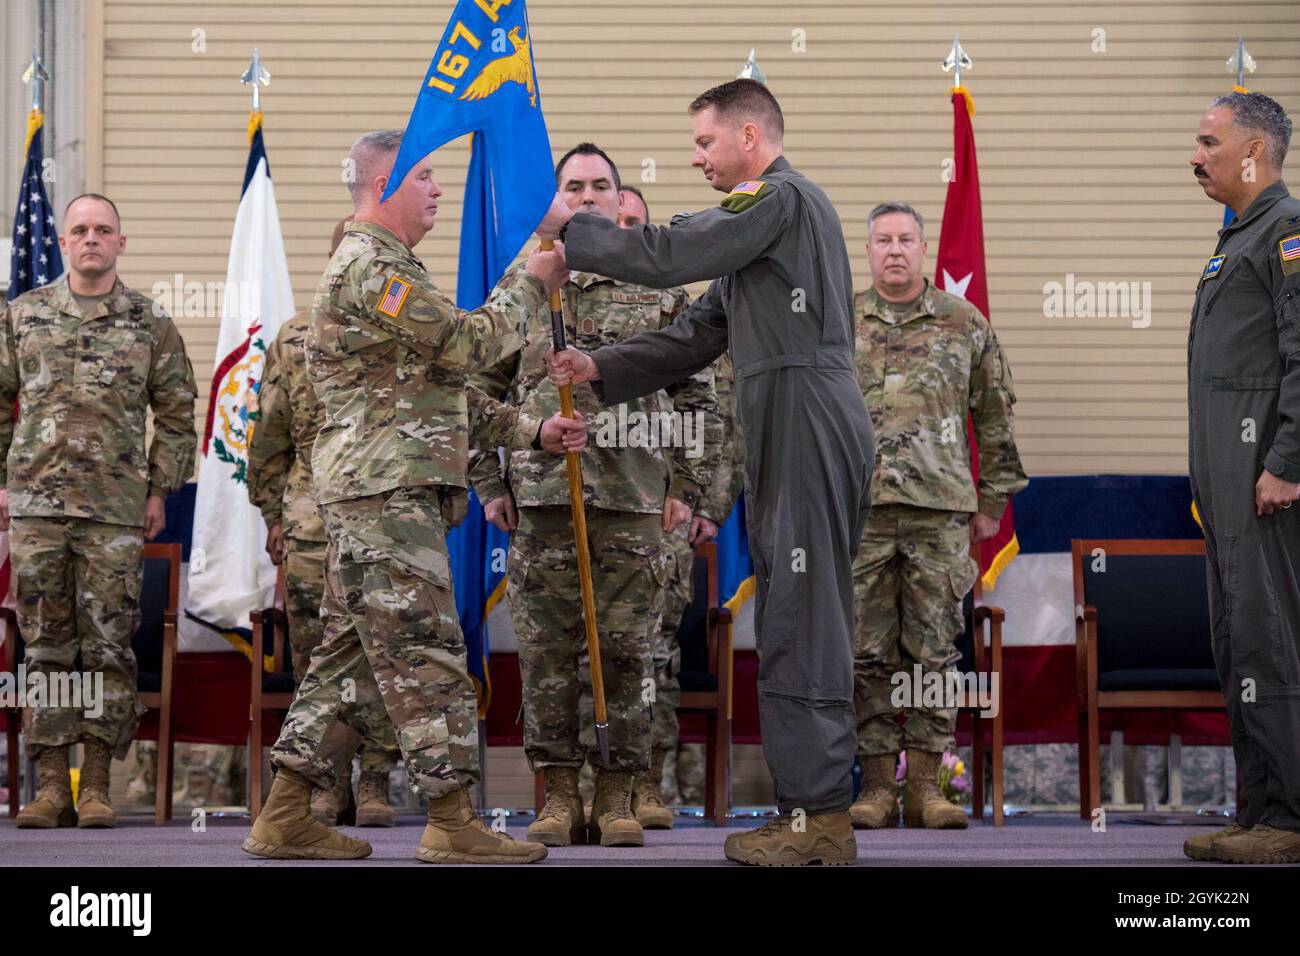 West Virginia National Guard Adjutant General, Maj. Gen. James Hoyer and Col. Martin Timko ceremoniously exchange the 167th Airlift Wing guidon during a change of command ceremony, Jan. 12, 2020. Timko assumed command of the wing, Col. David Cochran relinquished command during the ceremony. (U.S. Air National Guard photo by Senior Master Sgt. Emily Beightol-Deyerle) Stock Photo